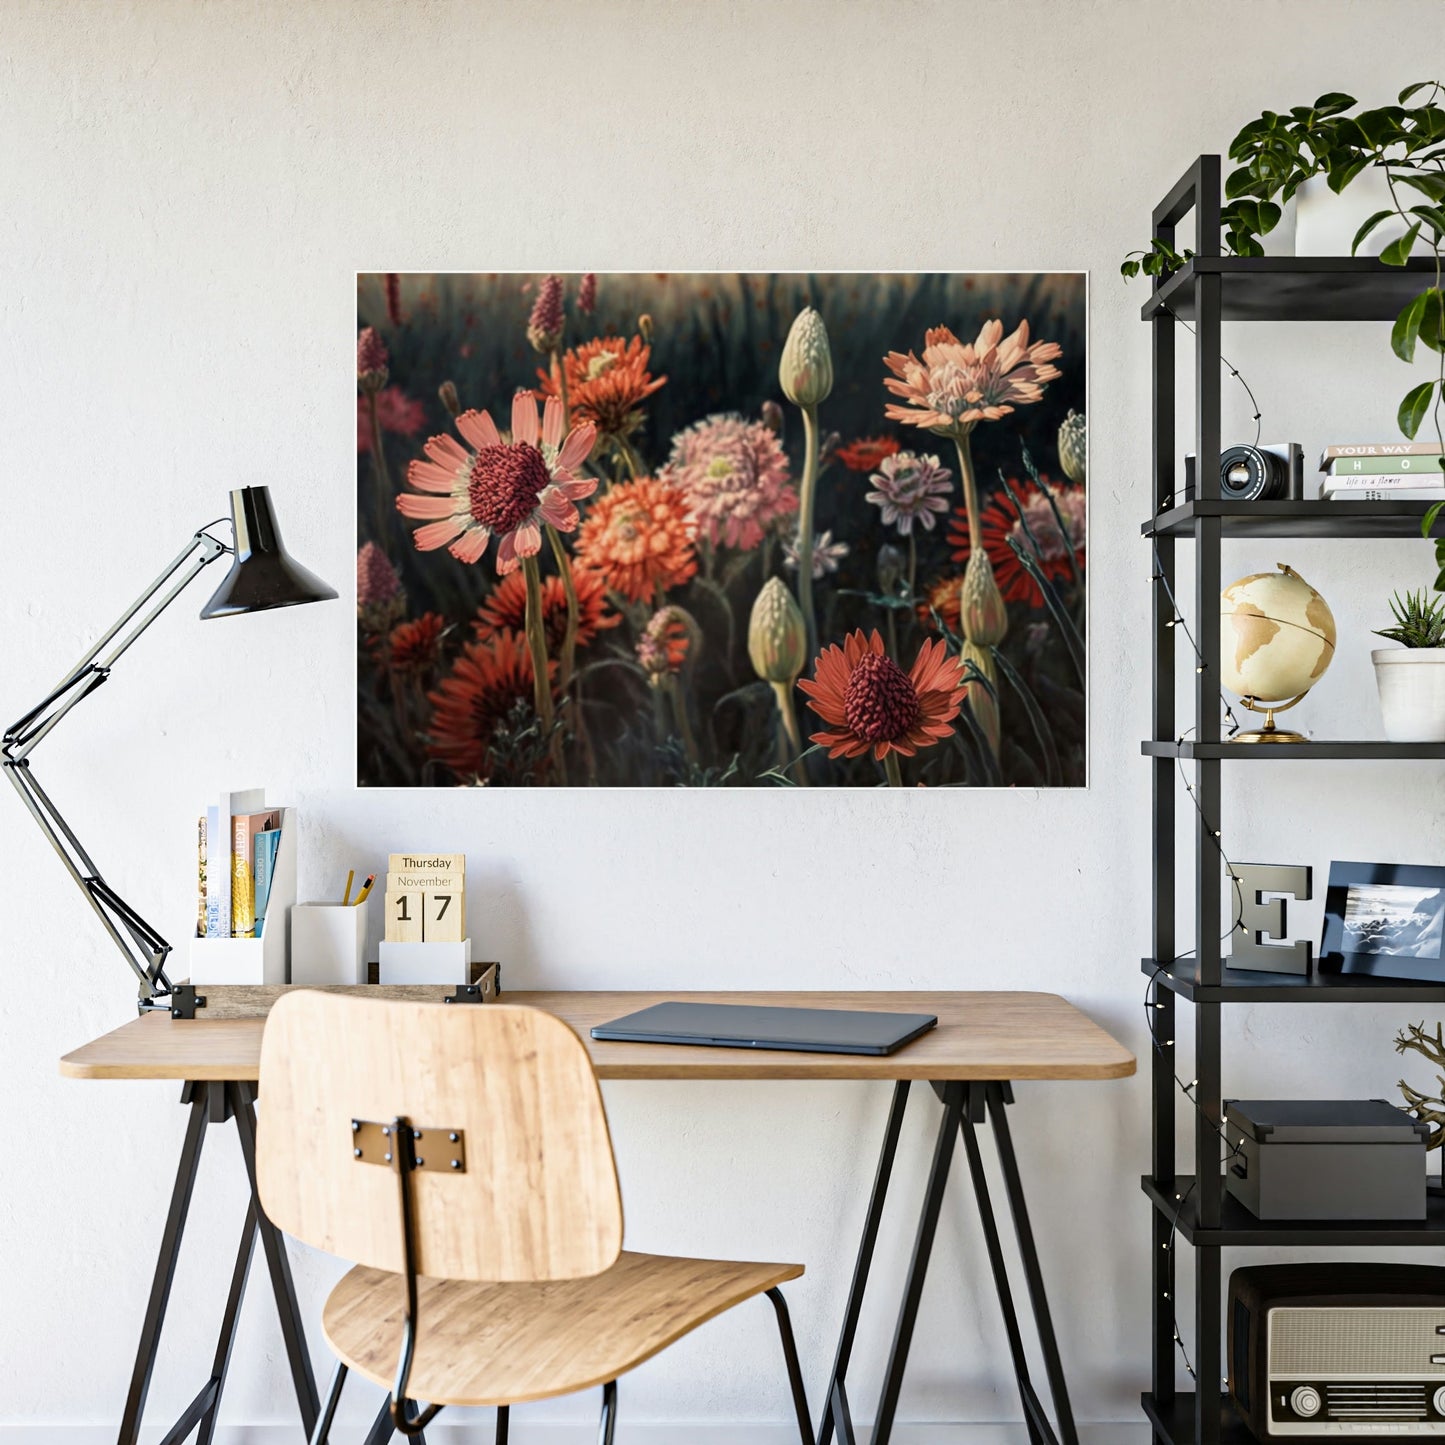 Vibrant Floral Delight: Framed Canvas & Posters Wall Art for a Splash of Color